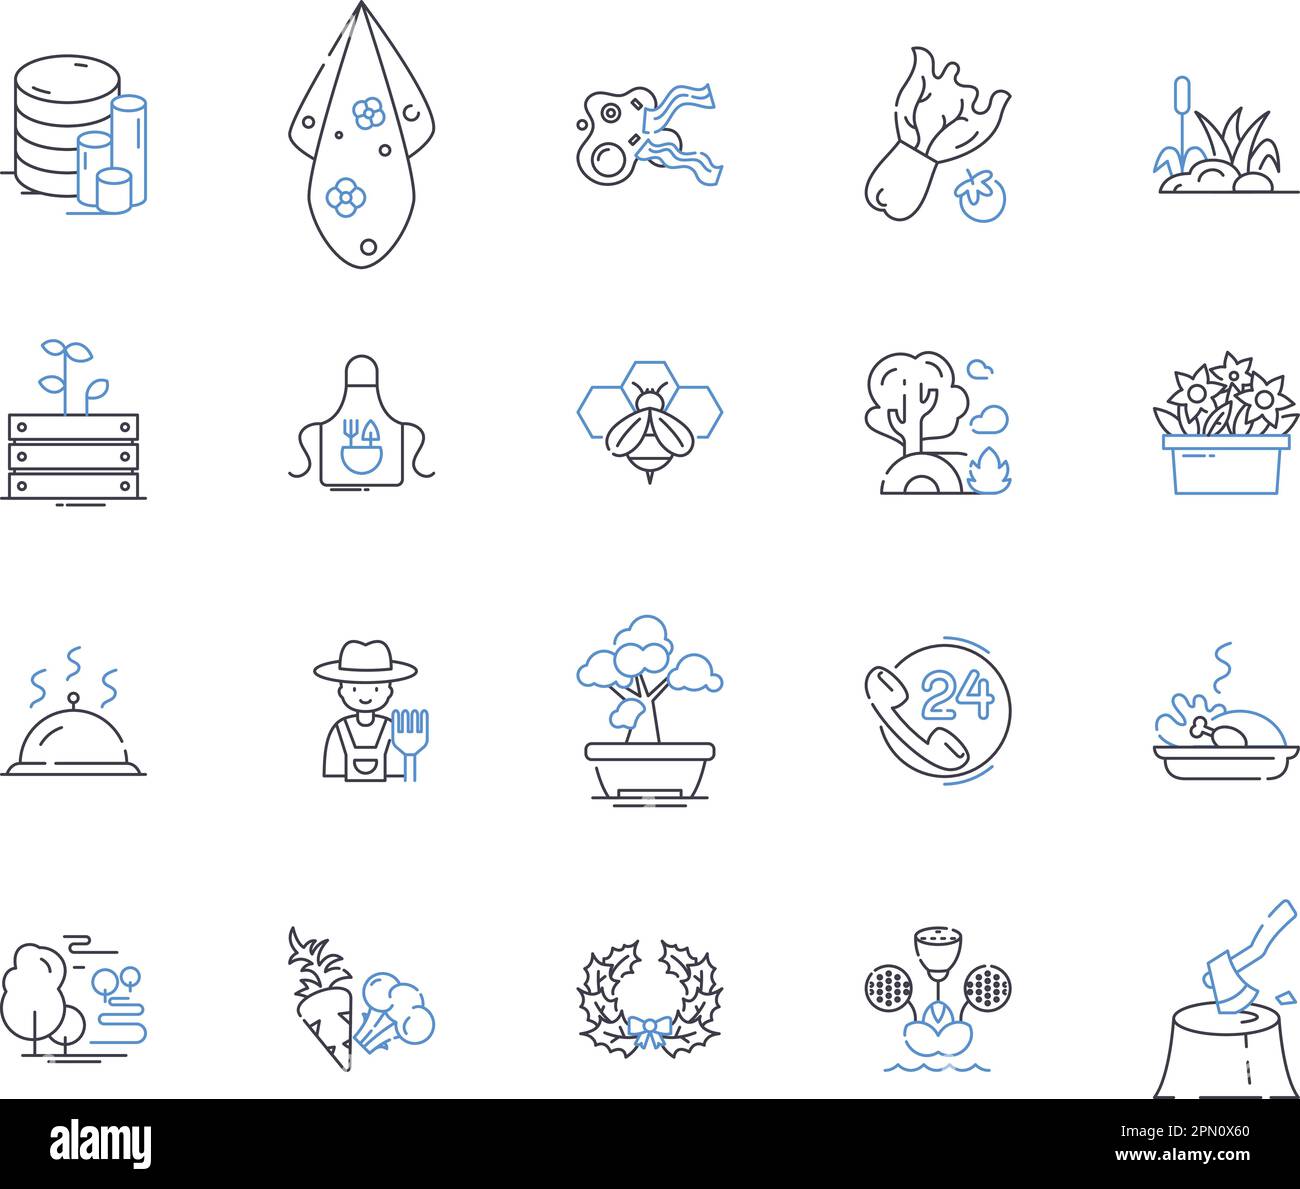 Farming factory outline icons collection. Farming, Factory, Agriculture, Crop, Cultivation, Grower, Harvester vector and illustration concept set Stock Vector